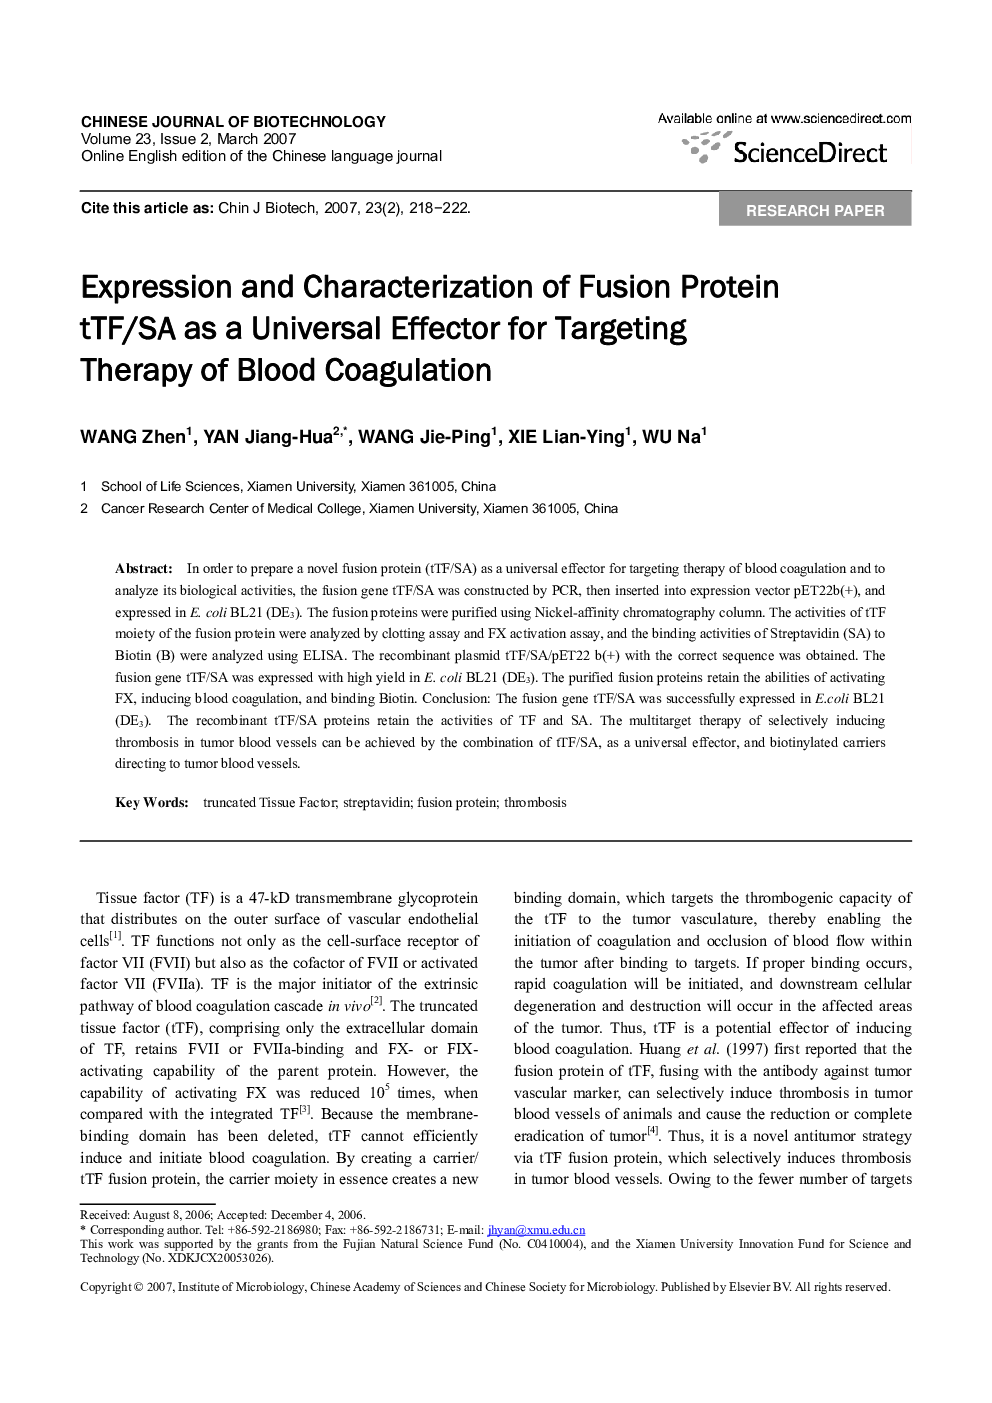 Expression and Characterization of Fusion Protein tTF/SA as a Universal Effector for Targeting Therapy of Blood Coagulation